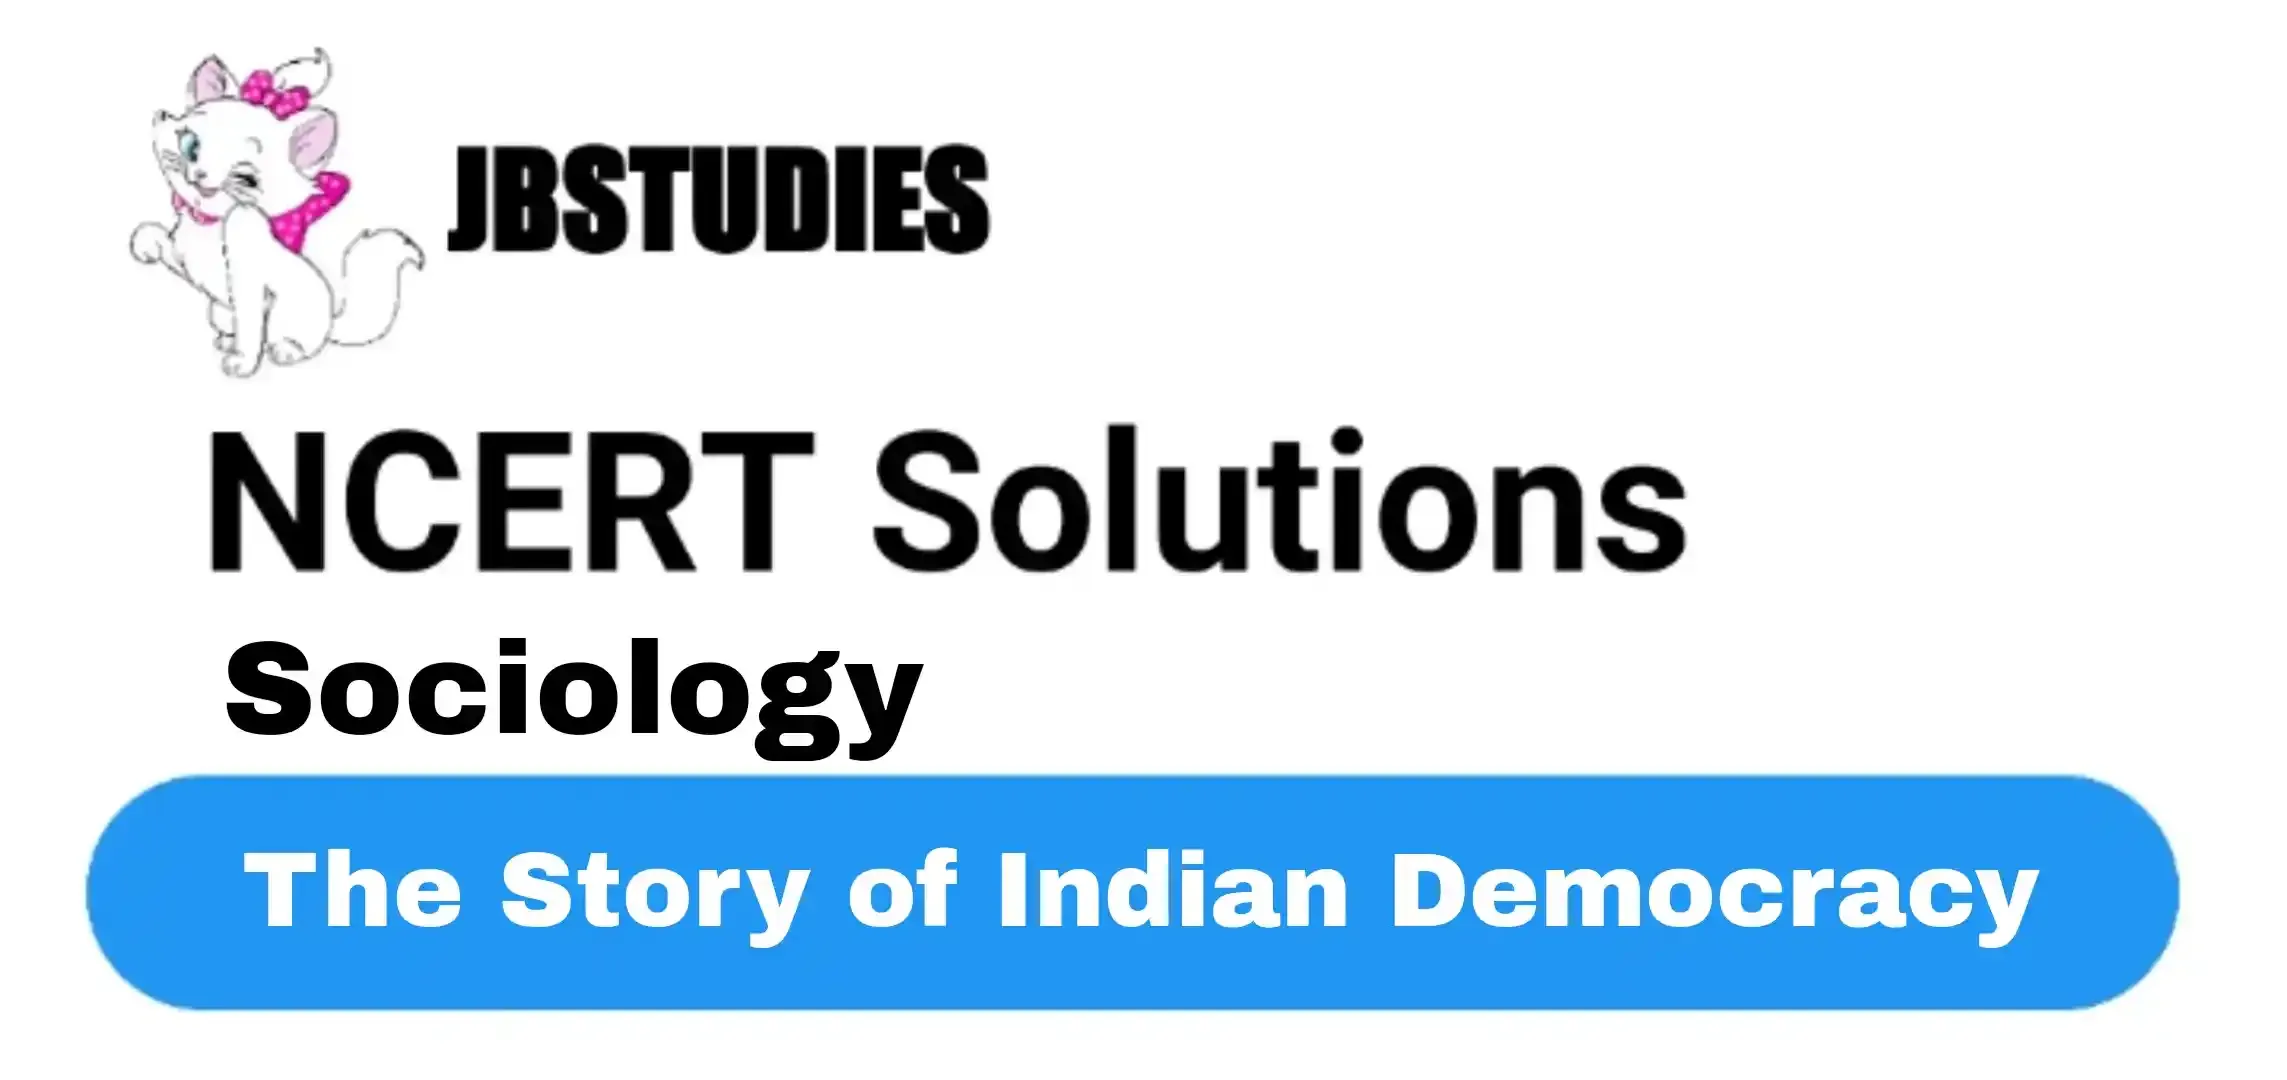 Solutions Class 12 Sociology Chapter -3 (The Story of Indian Democracy)